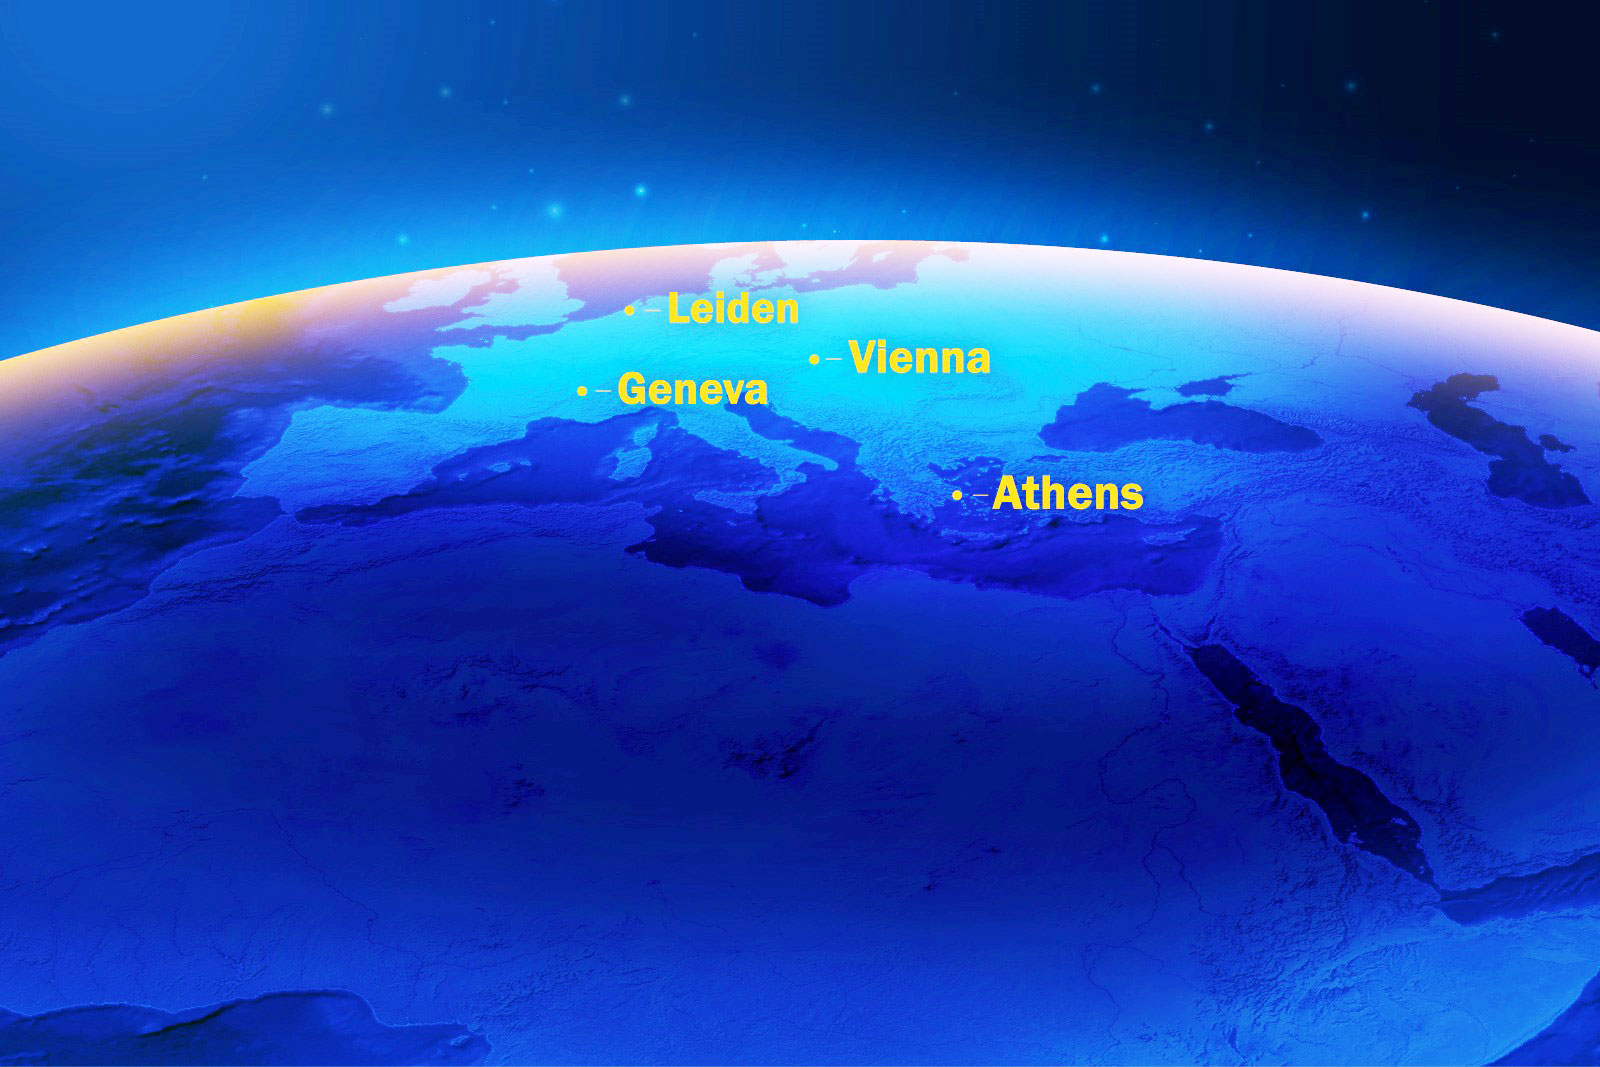 Rendering of the earth with the four European campus proximities marked and labelled.